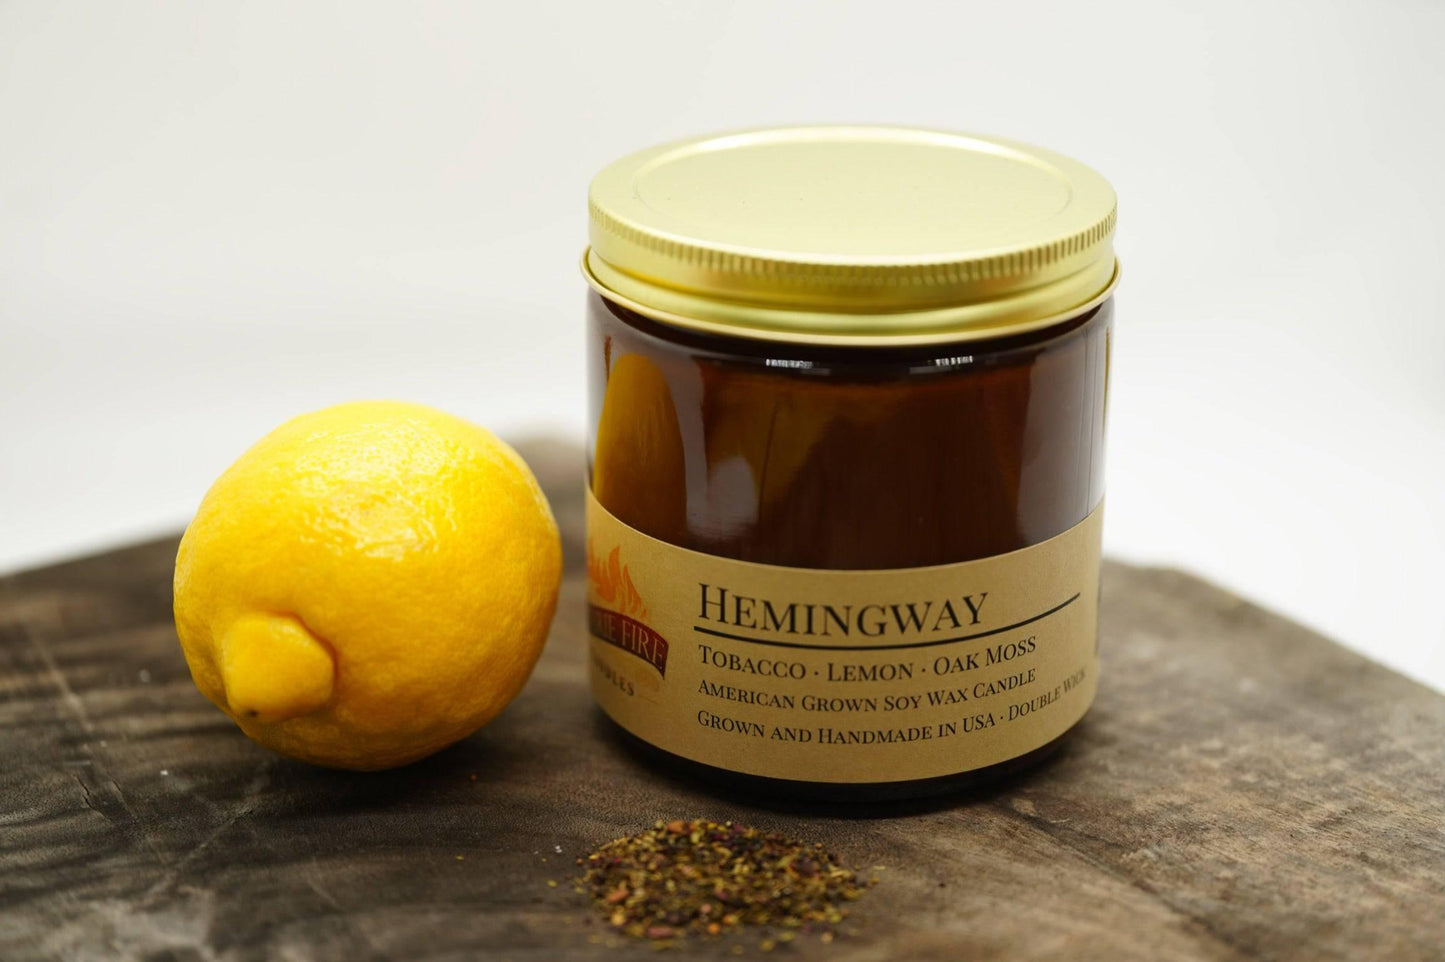 hemingway soy wax candle | 16 oz double wick amber apothecary jar by prairie fire tallow, candles, and lavender